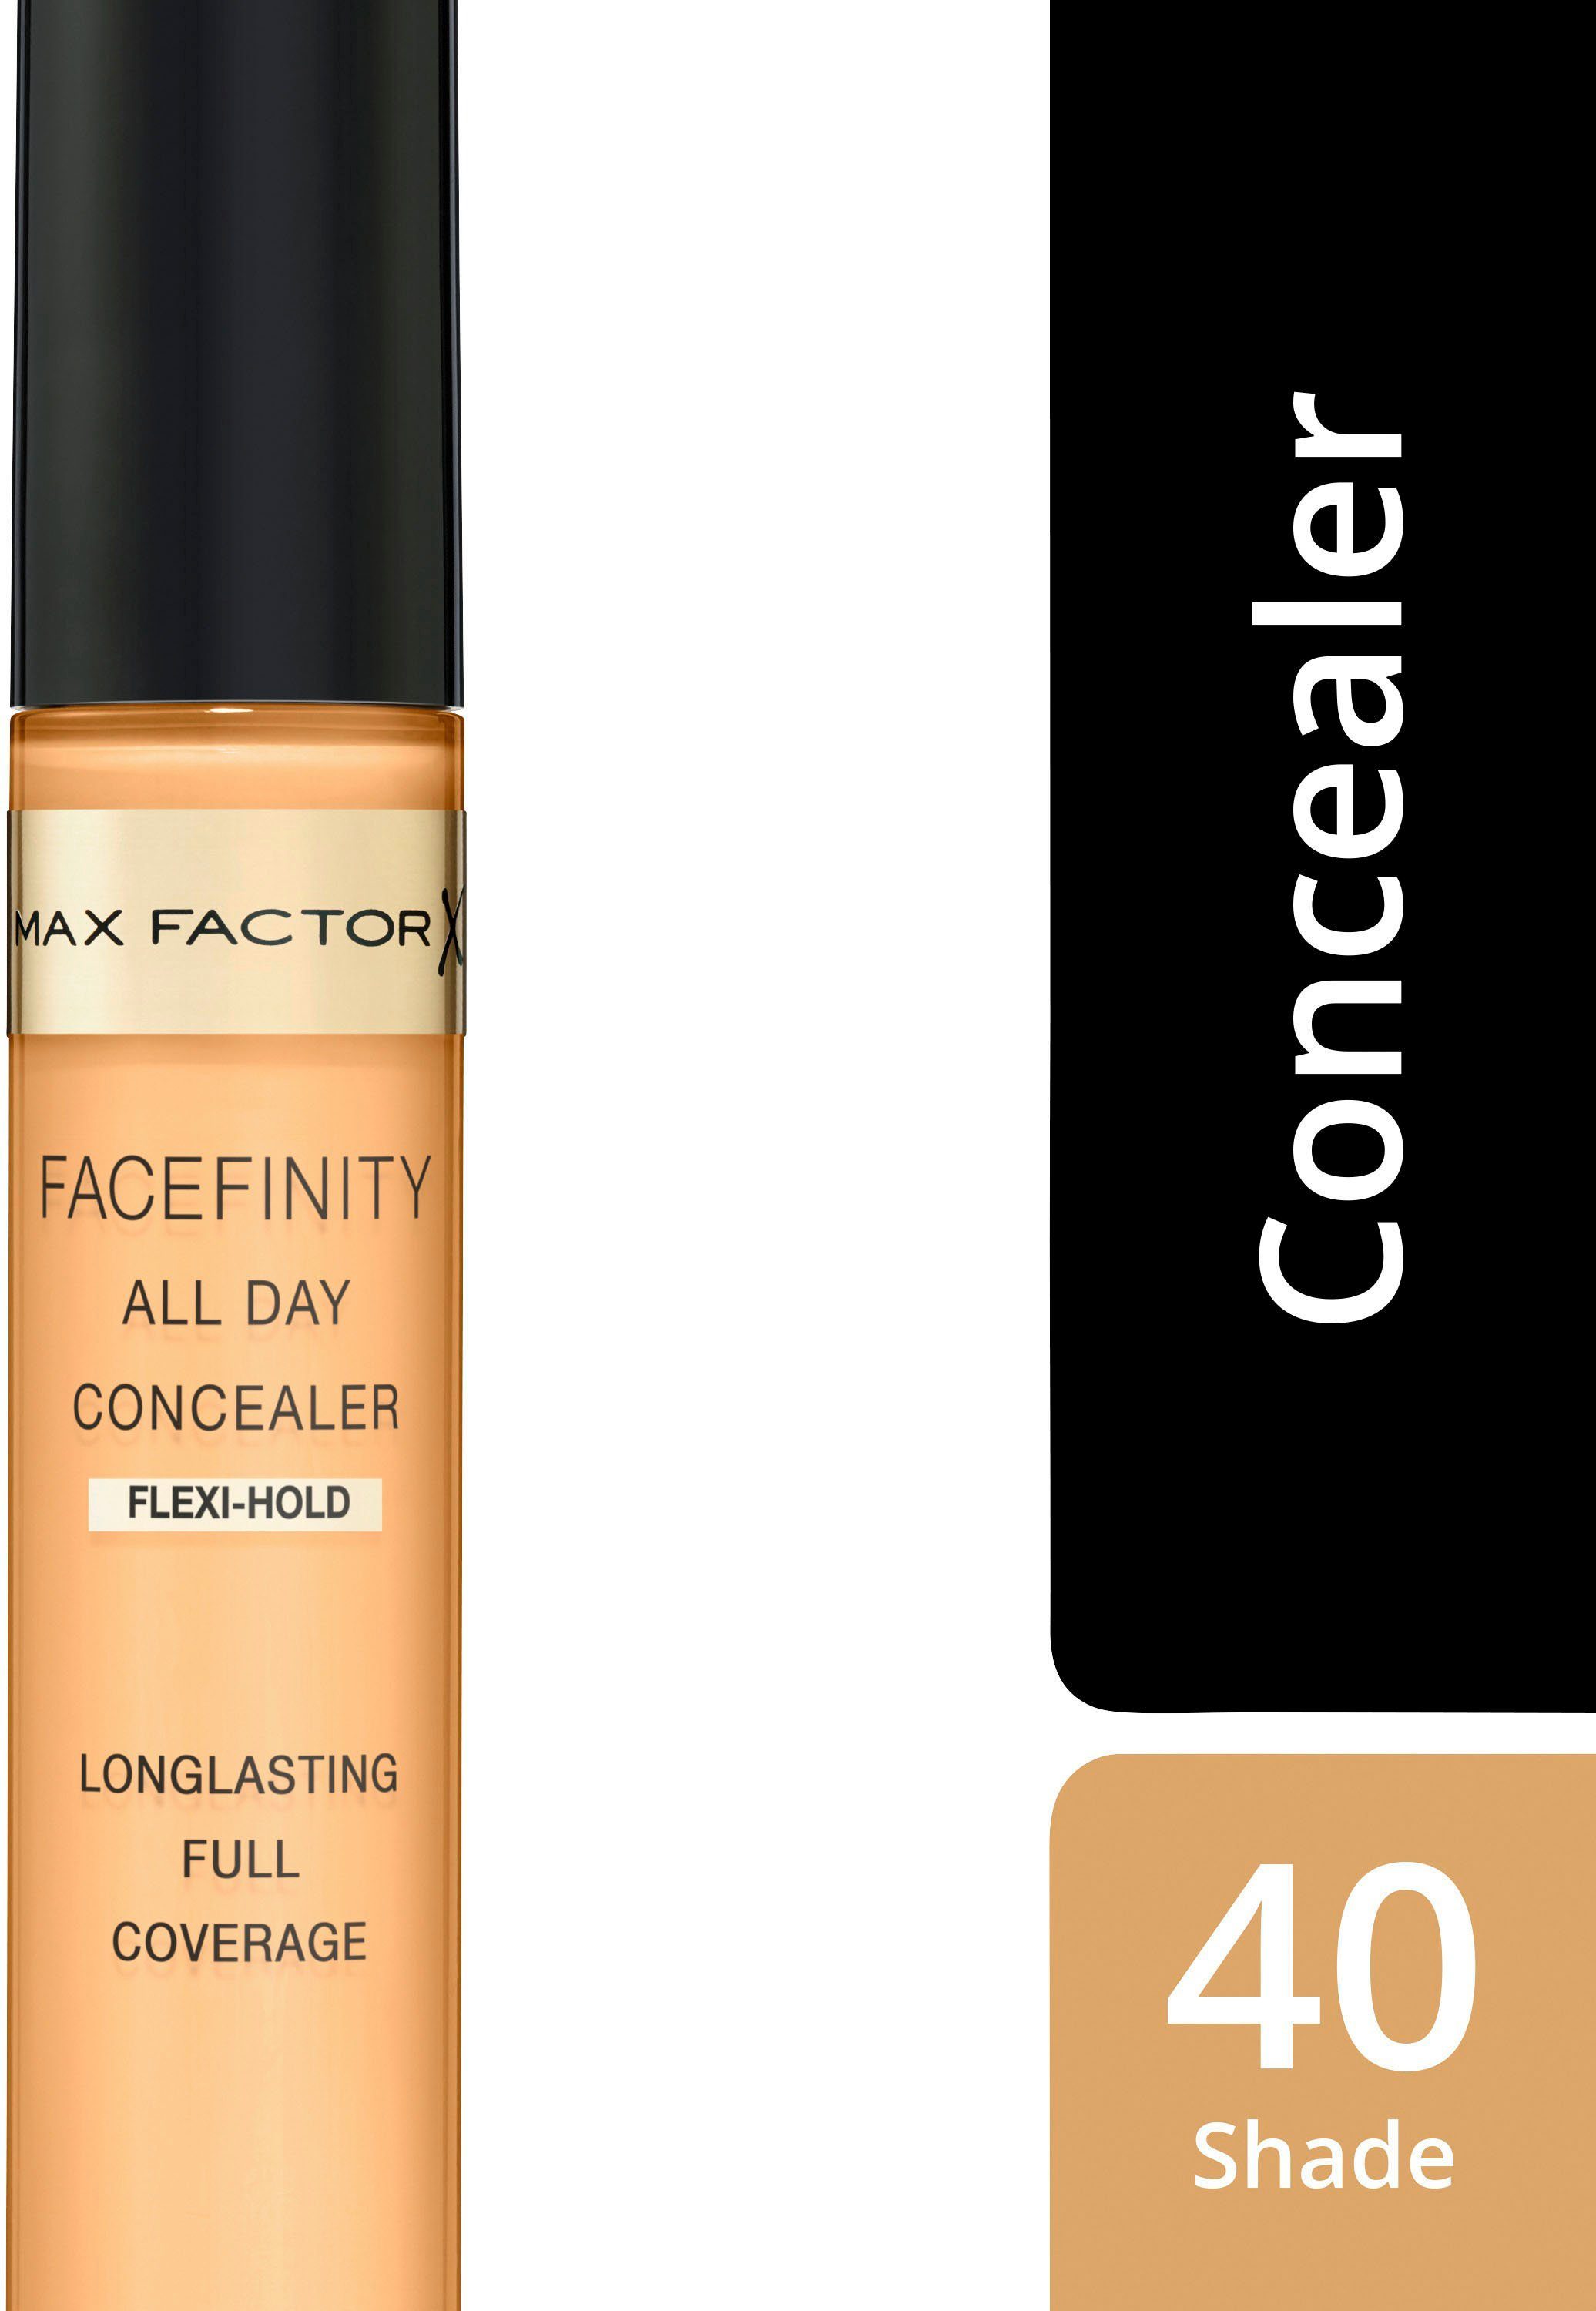 MAX FACTOR Concealer FACEFINITY 40 Day Flawless All